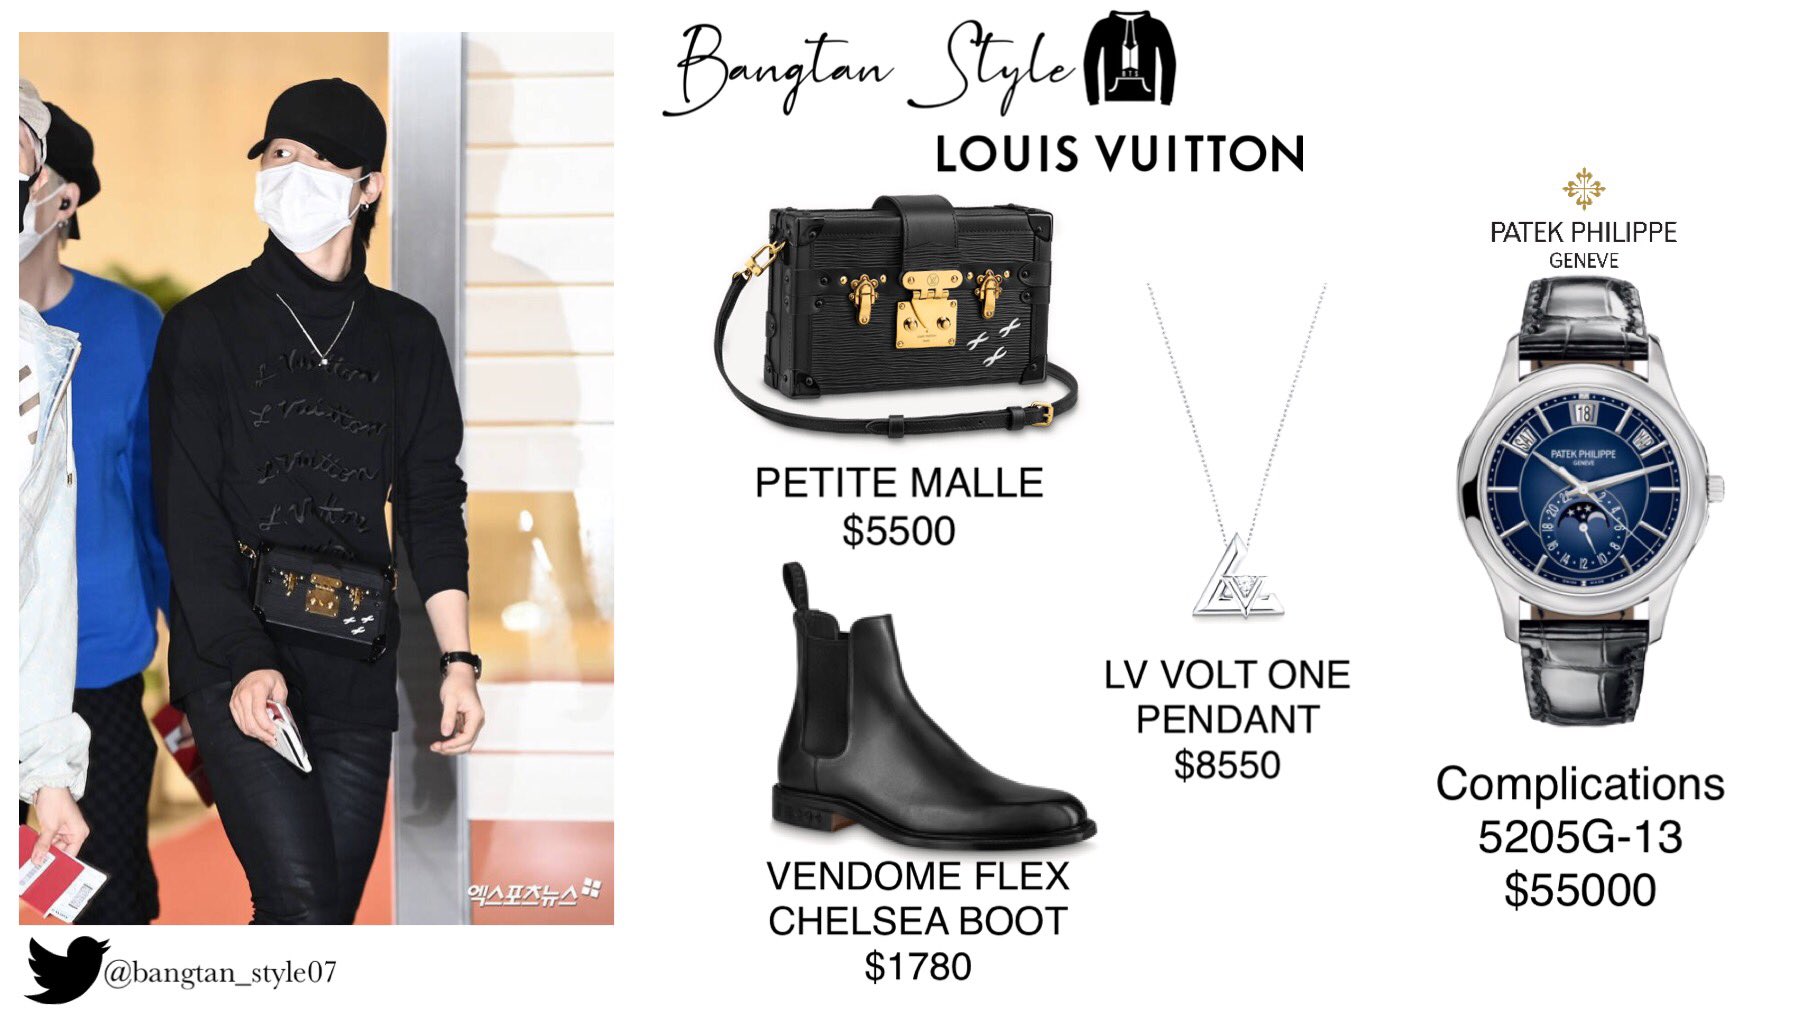 𝟏𝟑 on X: Jimin causes a sold-out crisis for the Louis Vuitton website.  $55000 PATEK PHILIPPE watch sold out in multiple outlets, $5000 bag sold  out in more than 20 countries, $1780